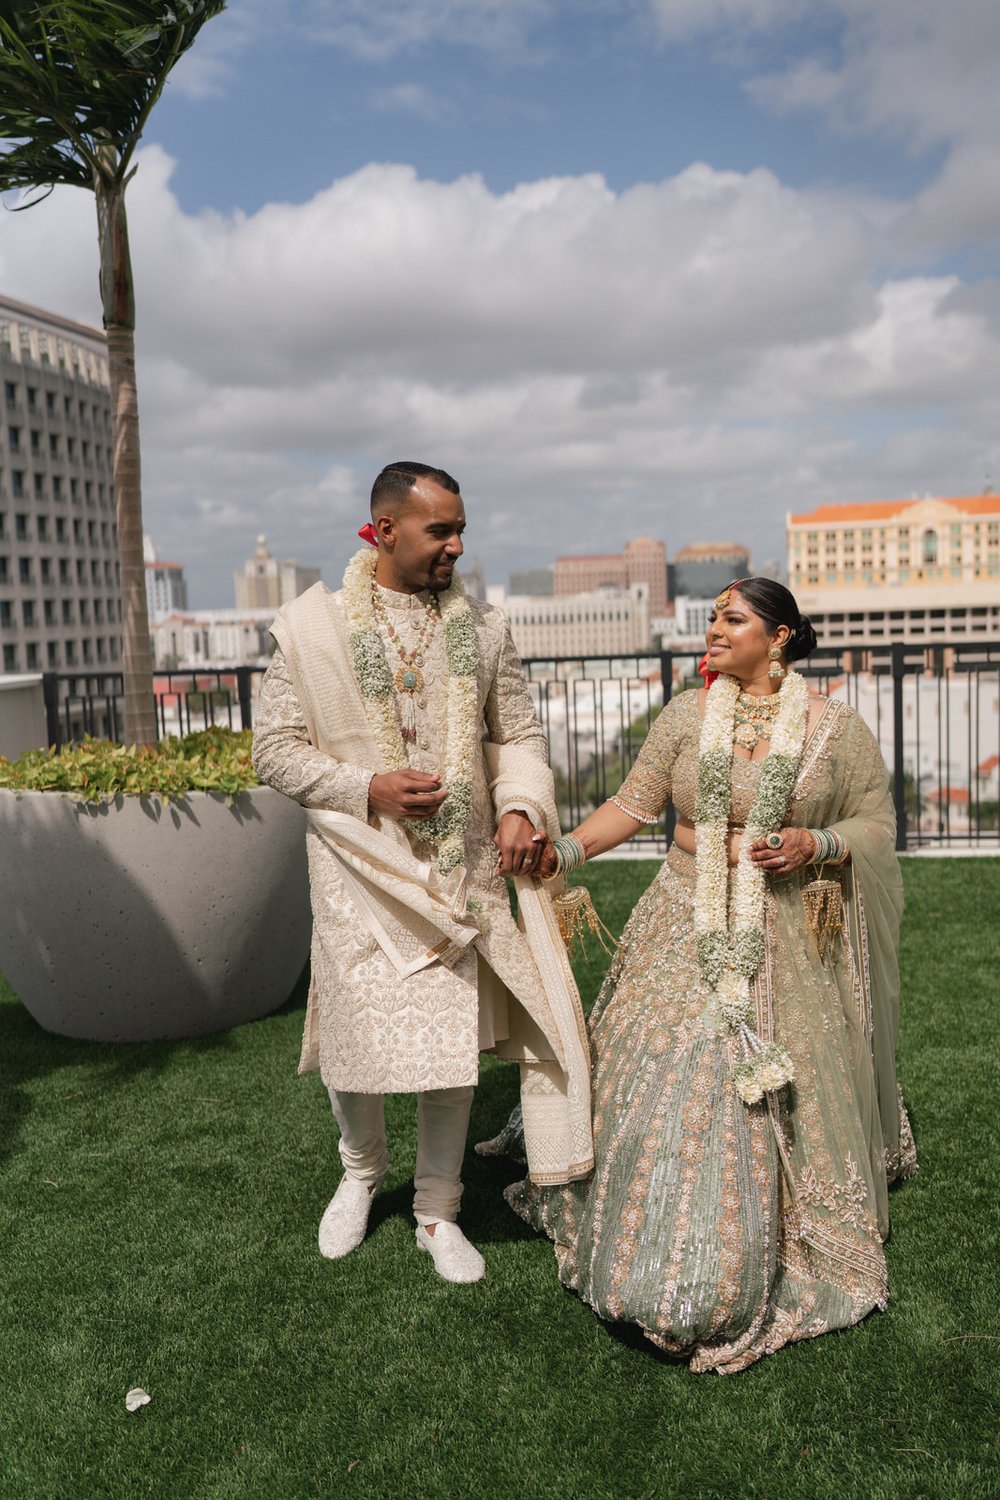 Luxury Indian Wedding in Miami Florida - Indian wedding photographer miami florida - michelle gonzalez photography - loews hotel in coral gables wedding-87.jpg